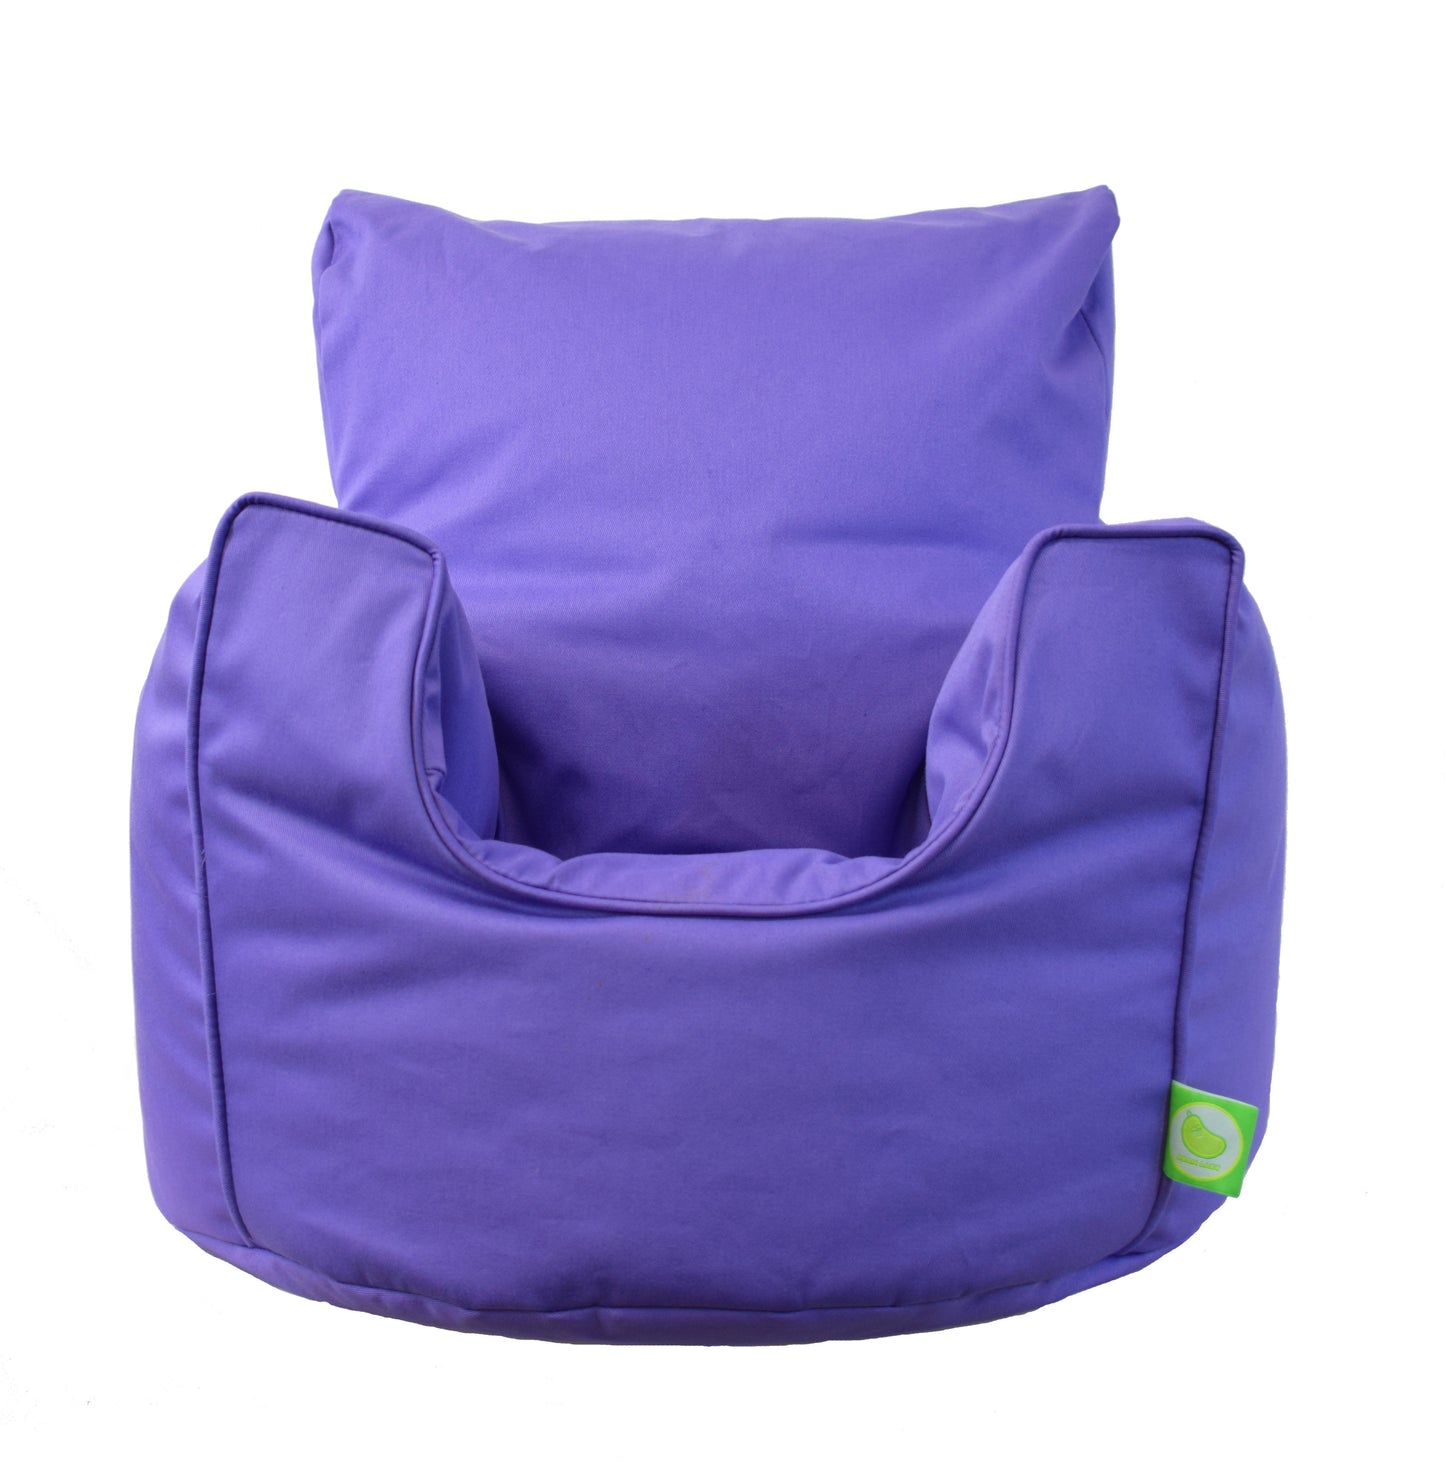 Cotton Twill Purple Lilac Bean Bag Arm Chair with Beans Child / Teen size